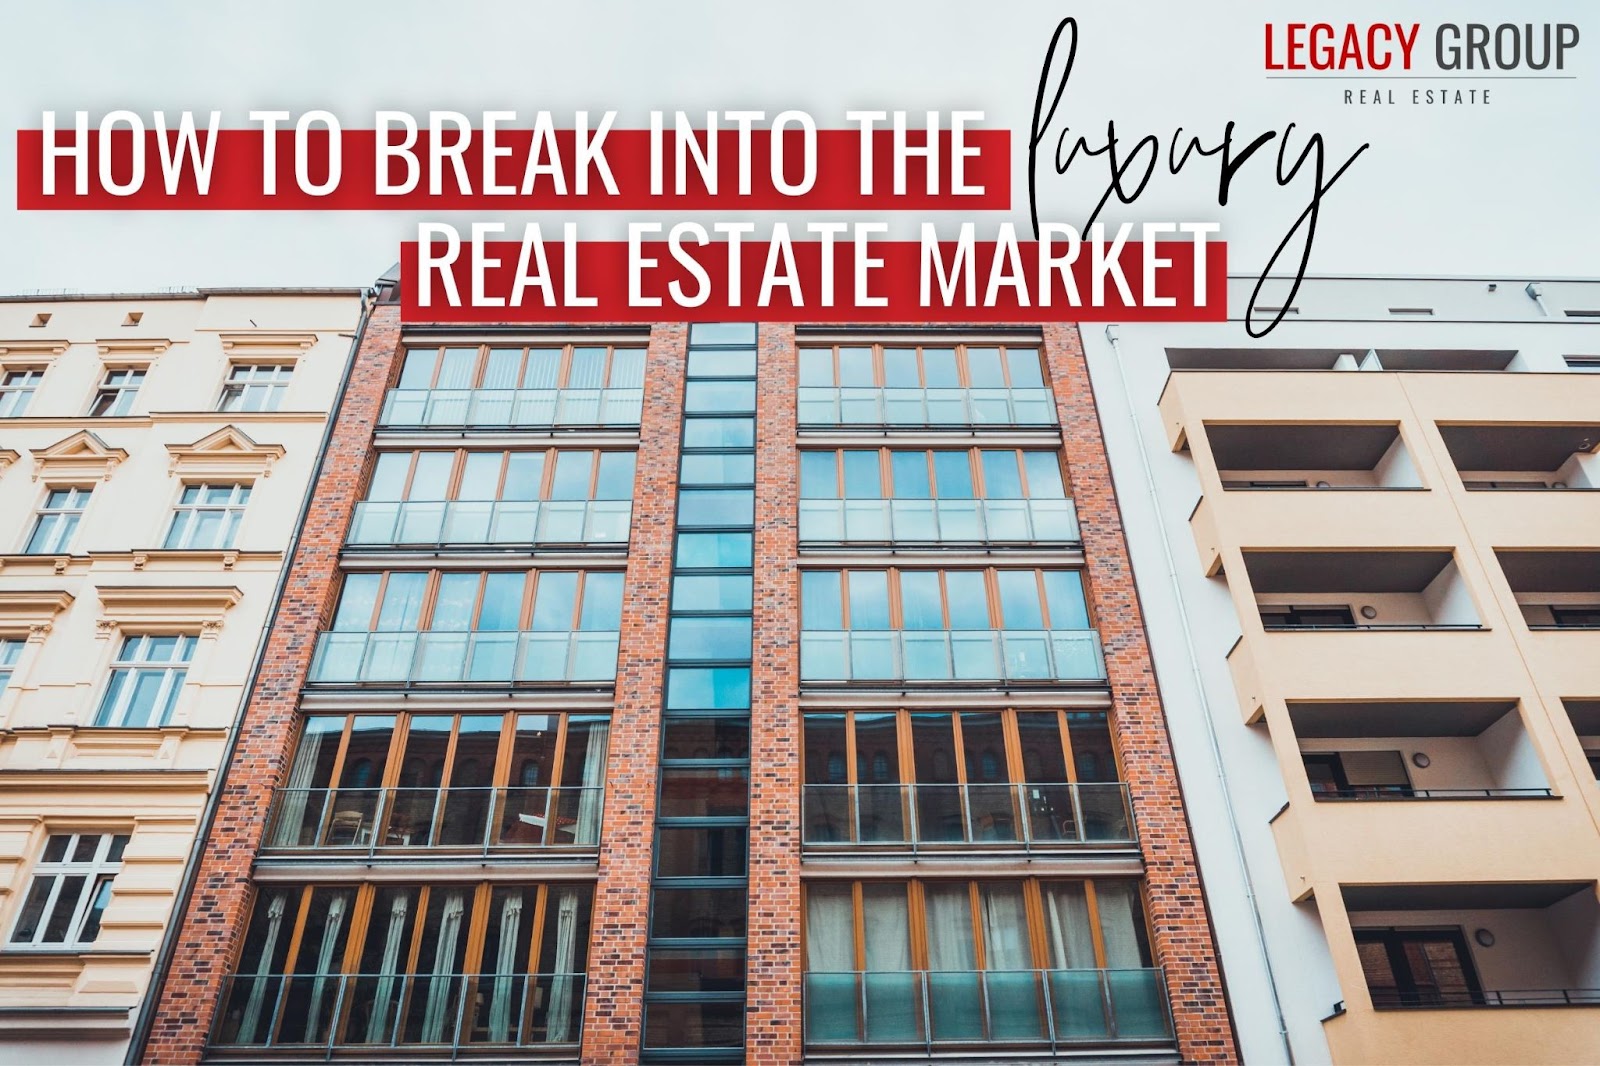 How To Break Into the Luxury Real Estate Market